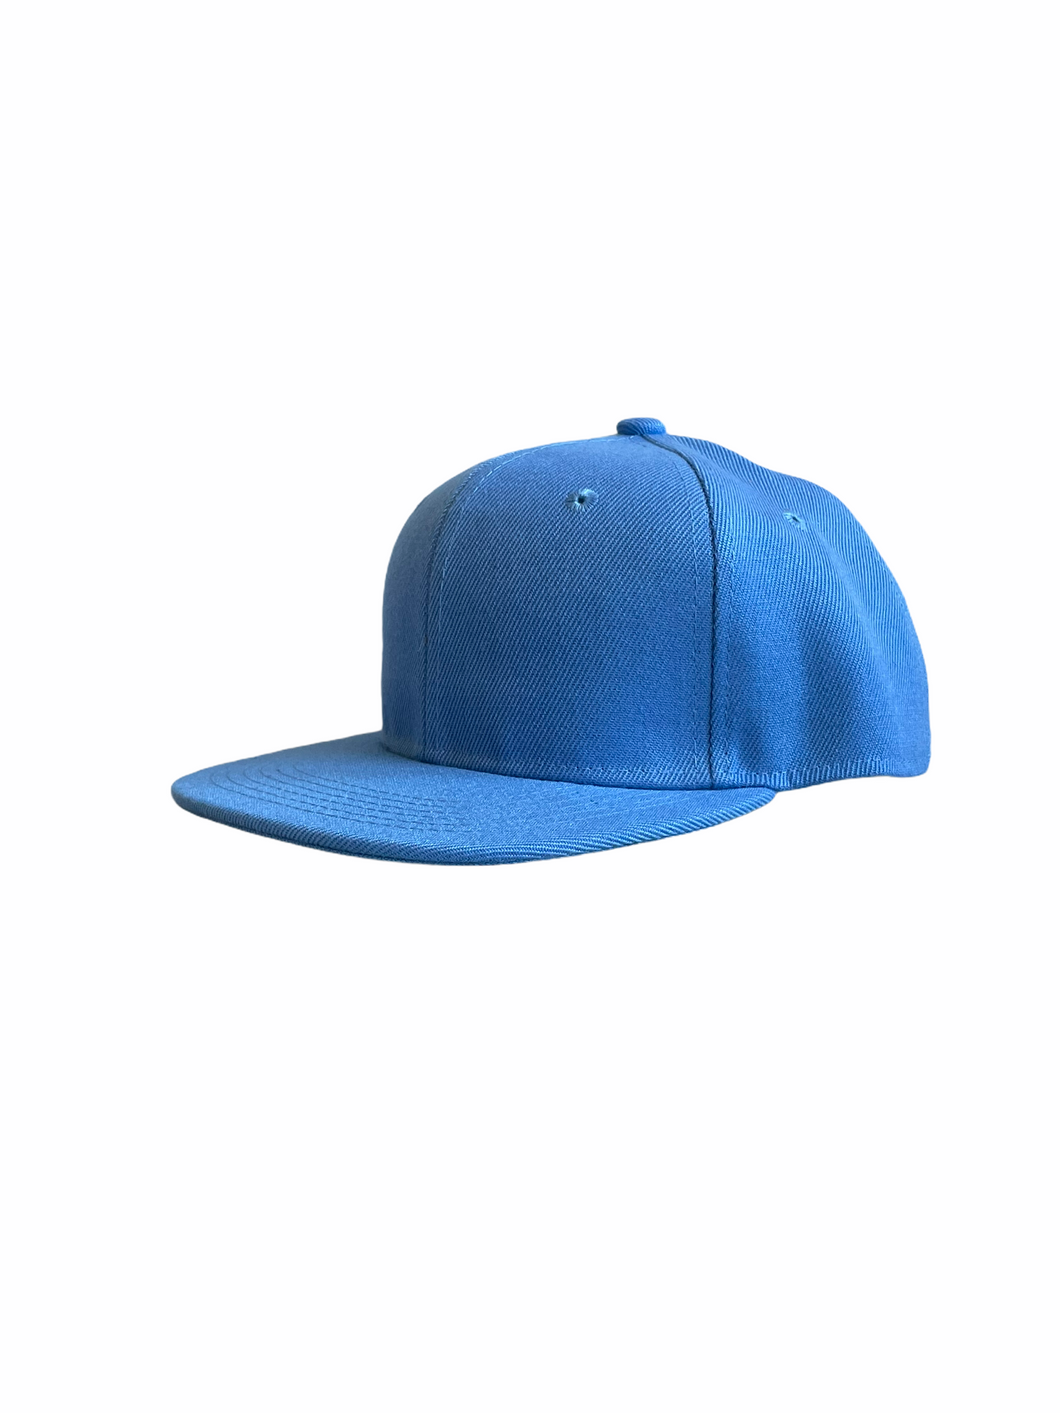 Sky Blue Infant Snapback - Plain and Personalised